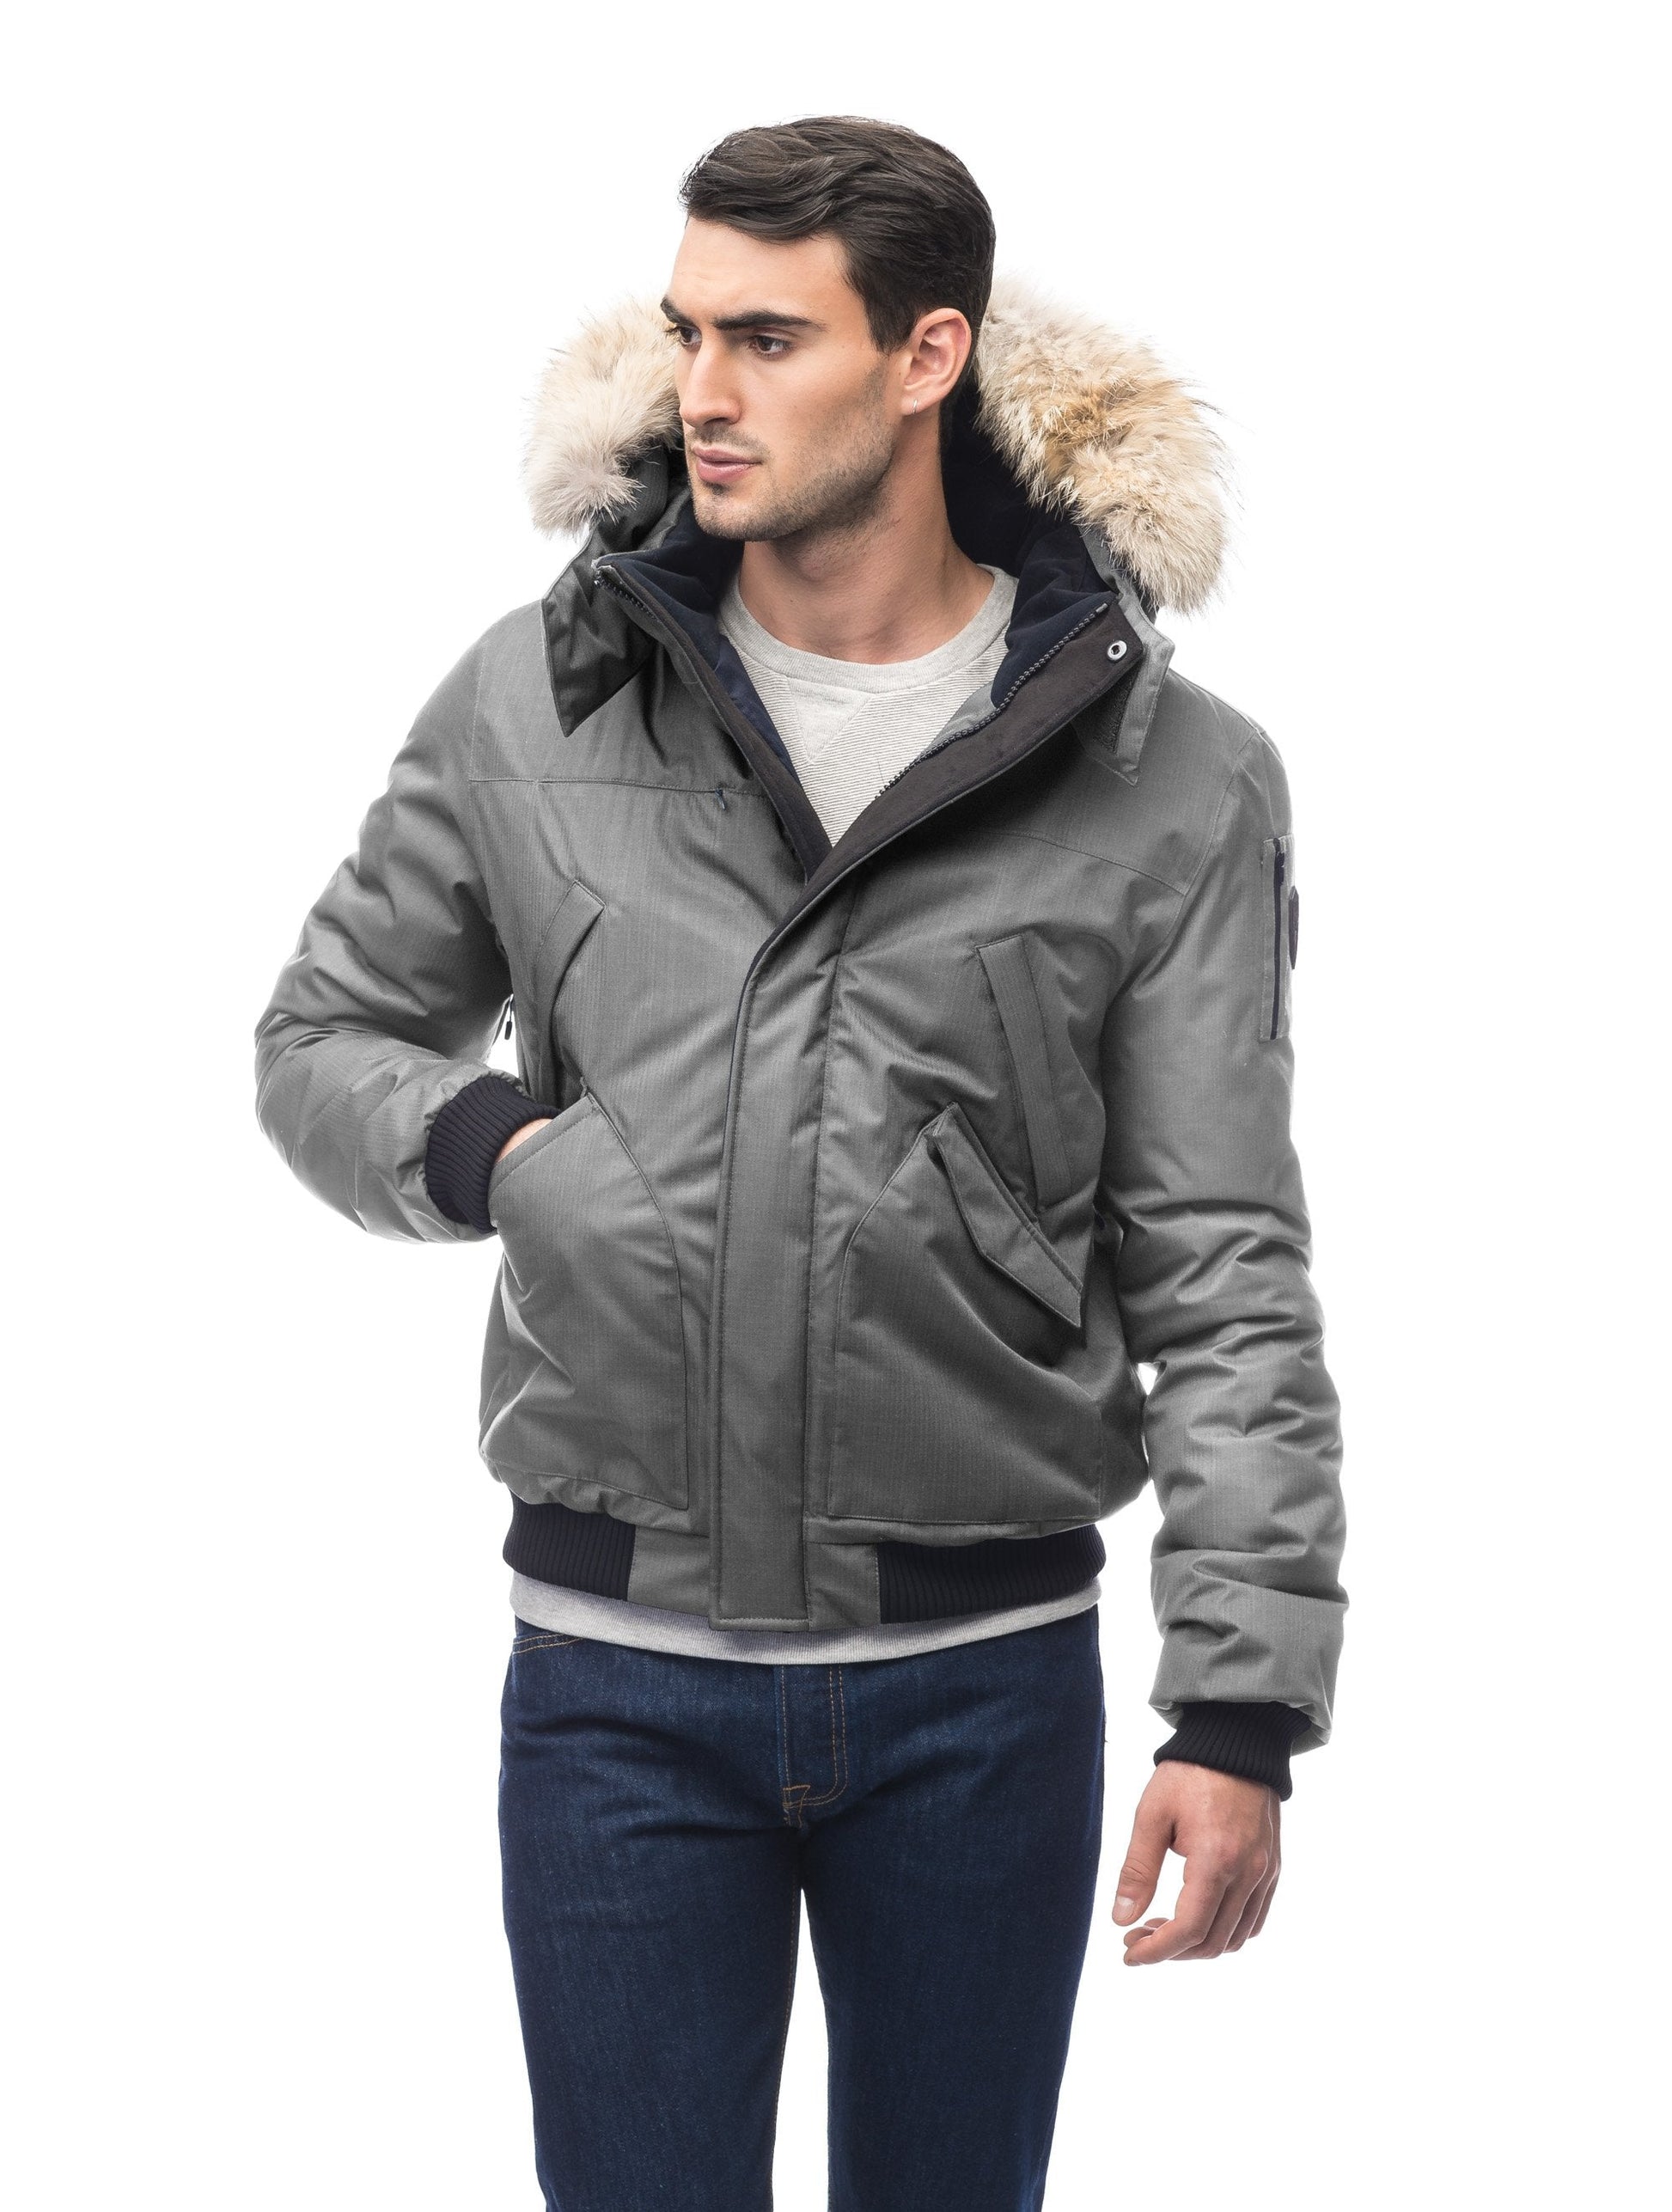 Men's classic down filled bomber jacket with a down filledÂ hood that features a removable coyote fur trim and concealed moldable framing wire in Concrete